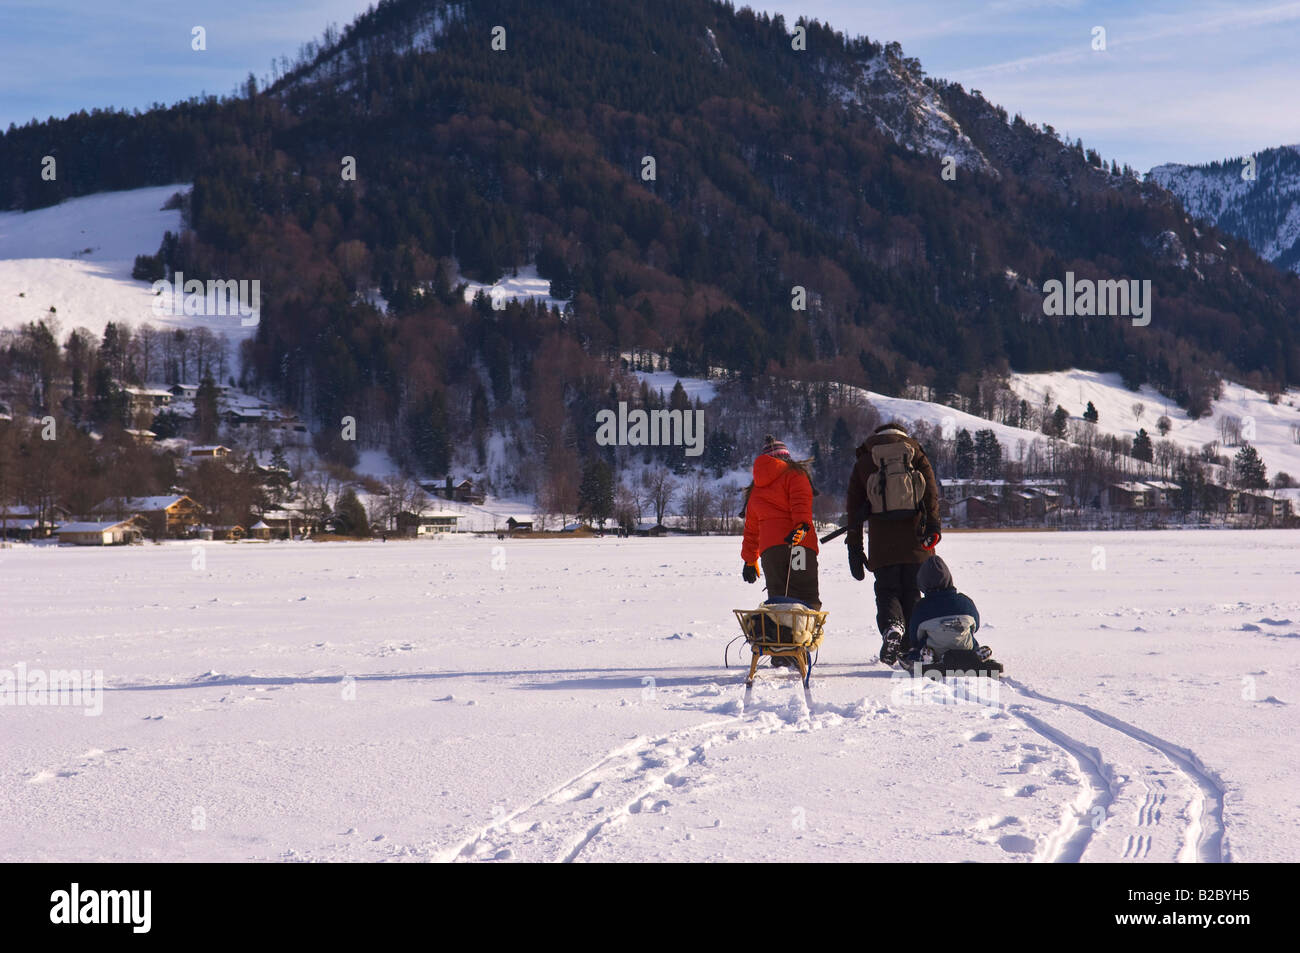 Hikers on the frozen Lake Schliersee, winter landscape, Bavaria, Germany, Europe Stock Photo